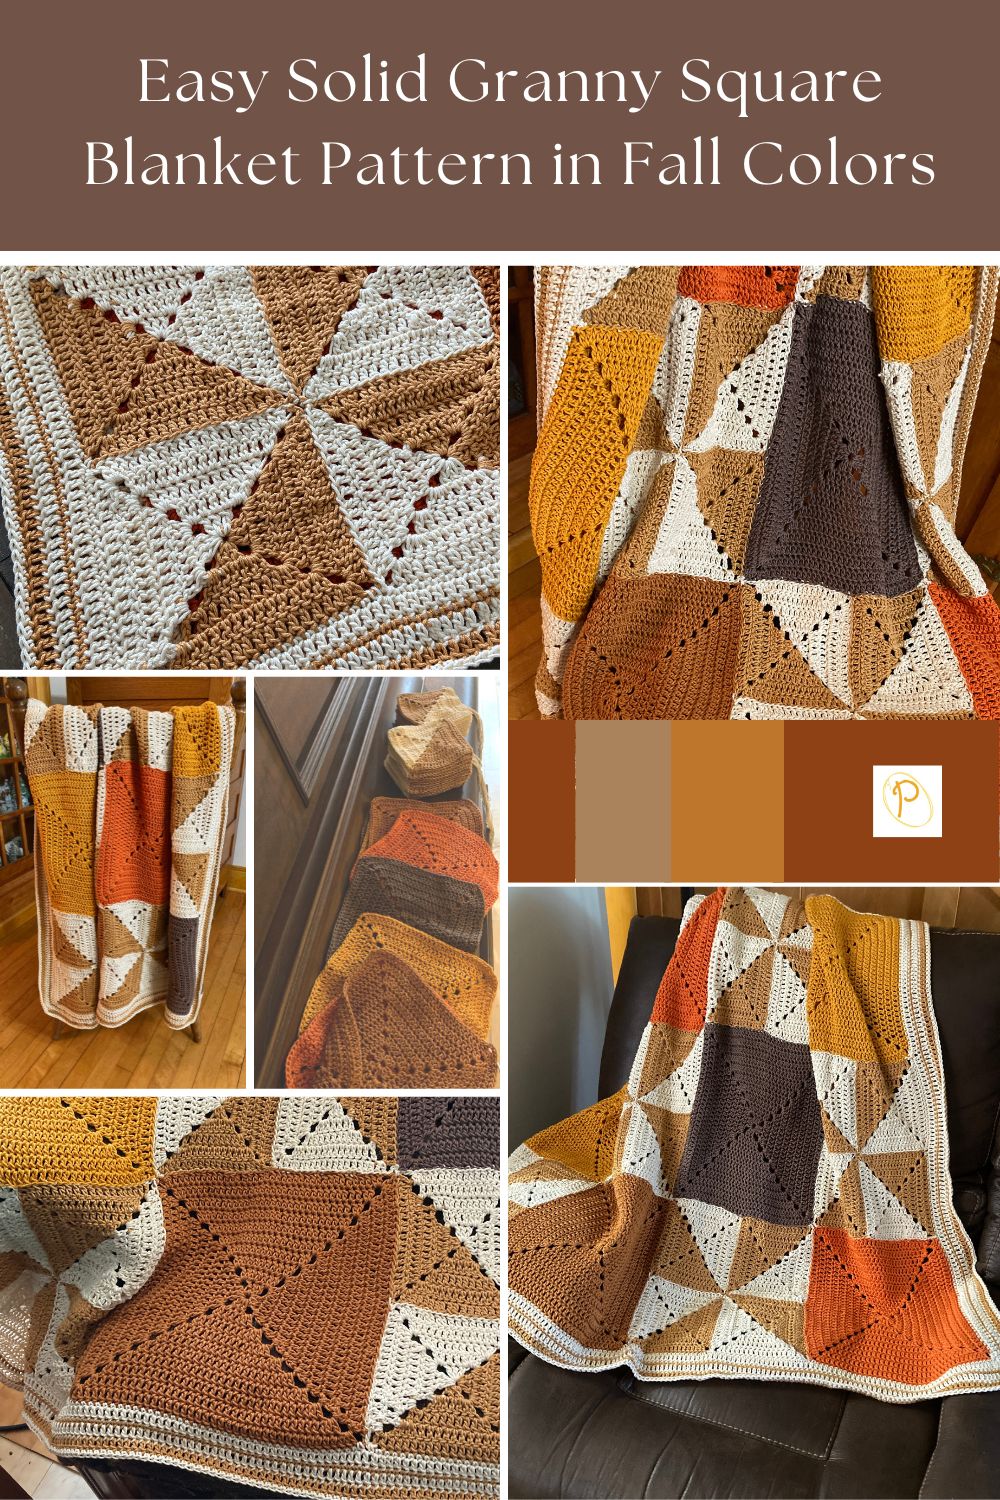 Easy Solid Granny Square Blanket Pattern in Fall Colors